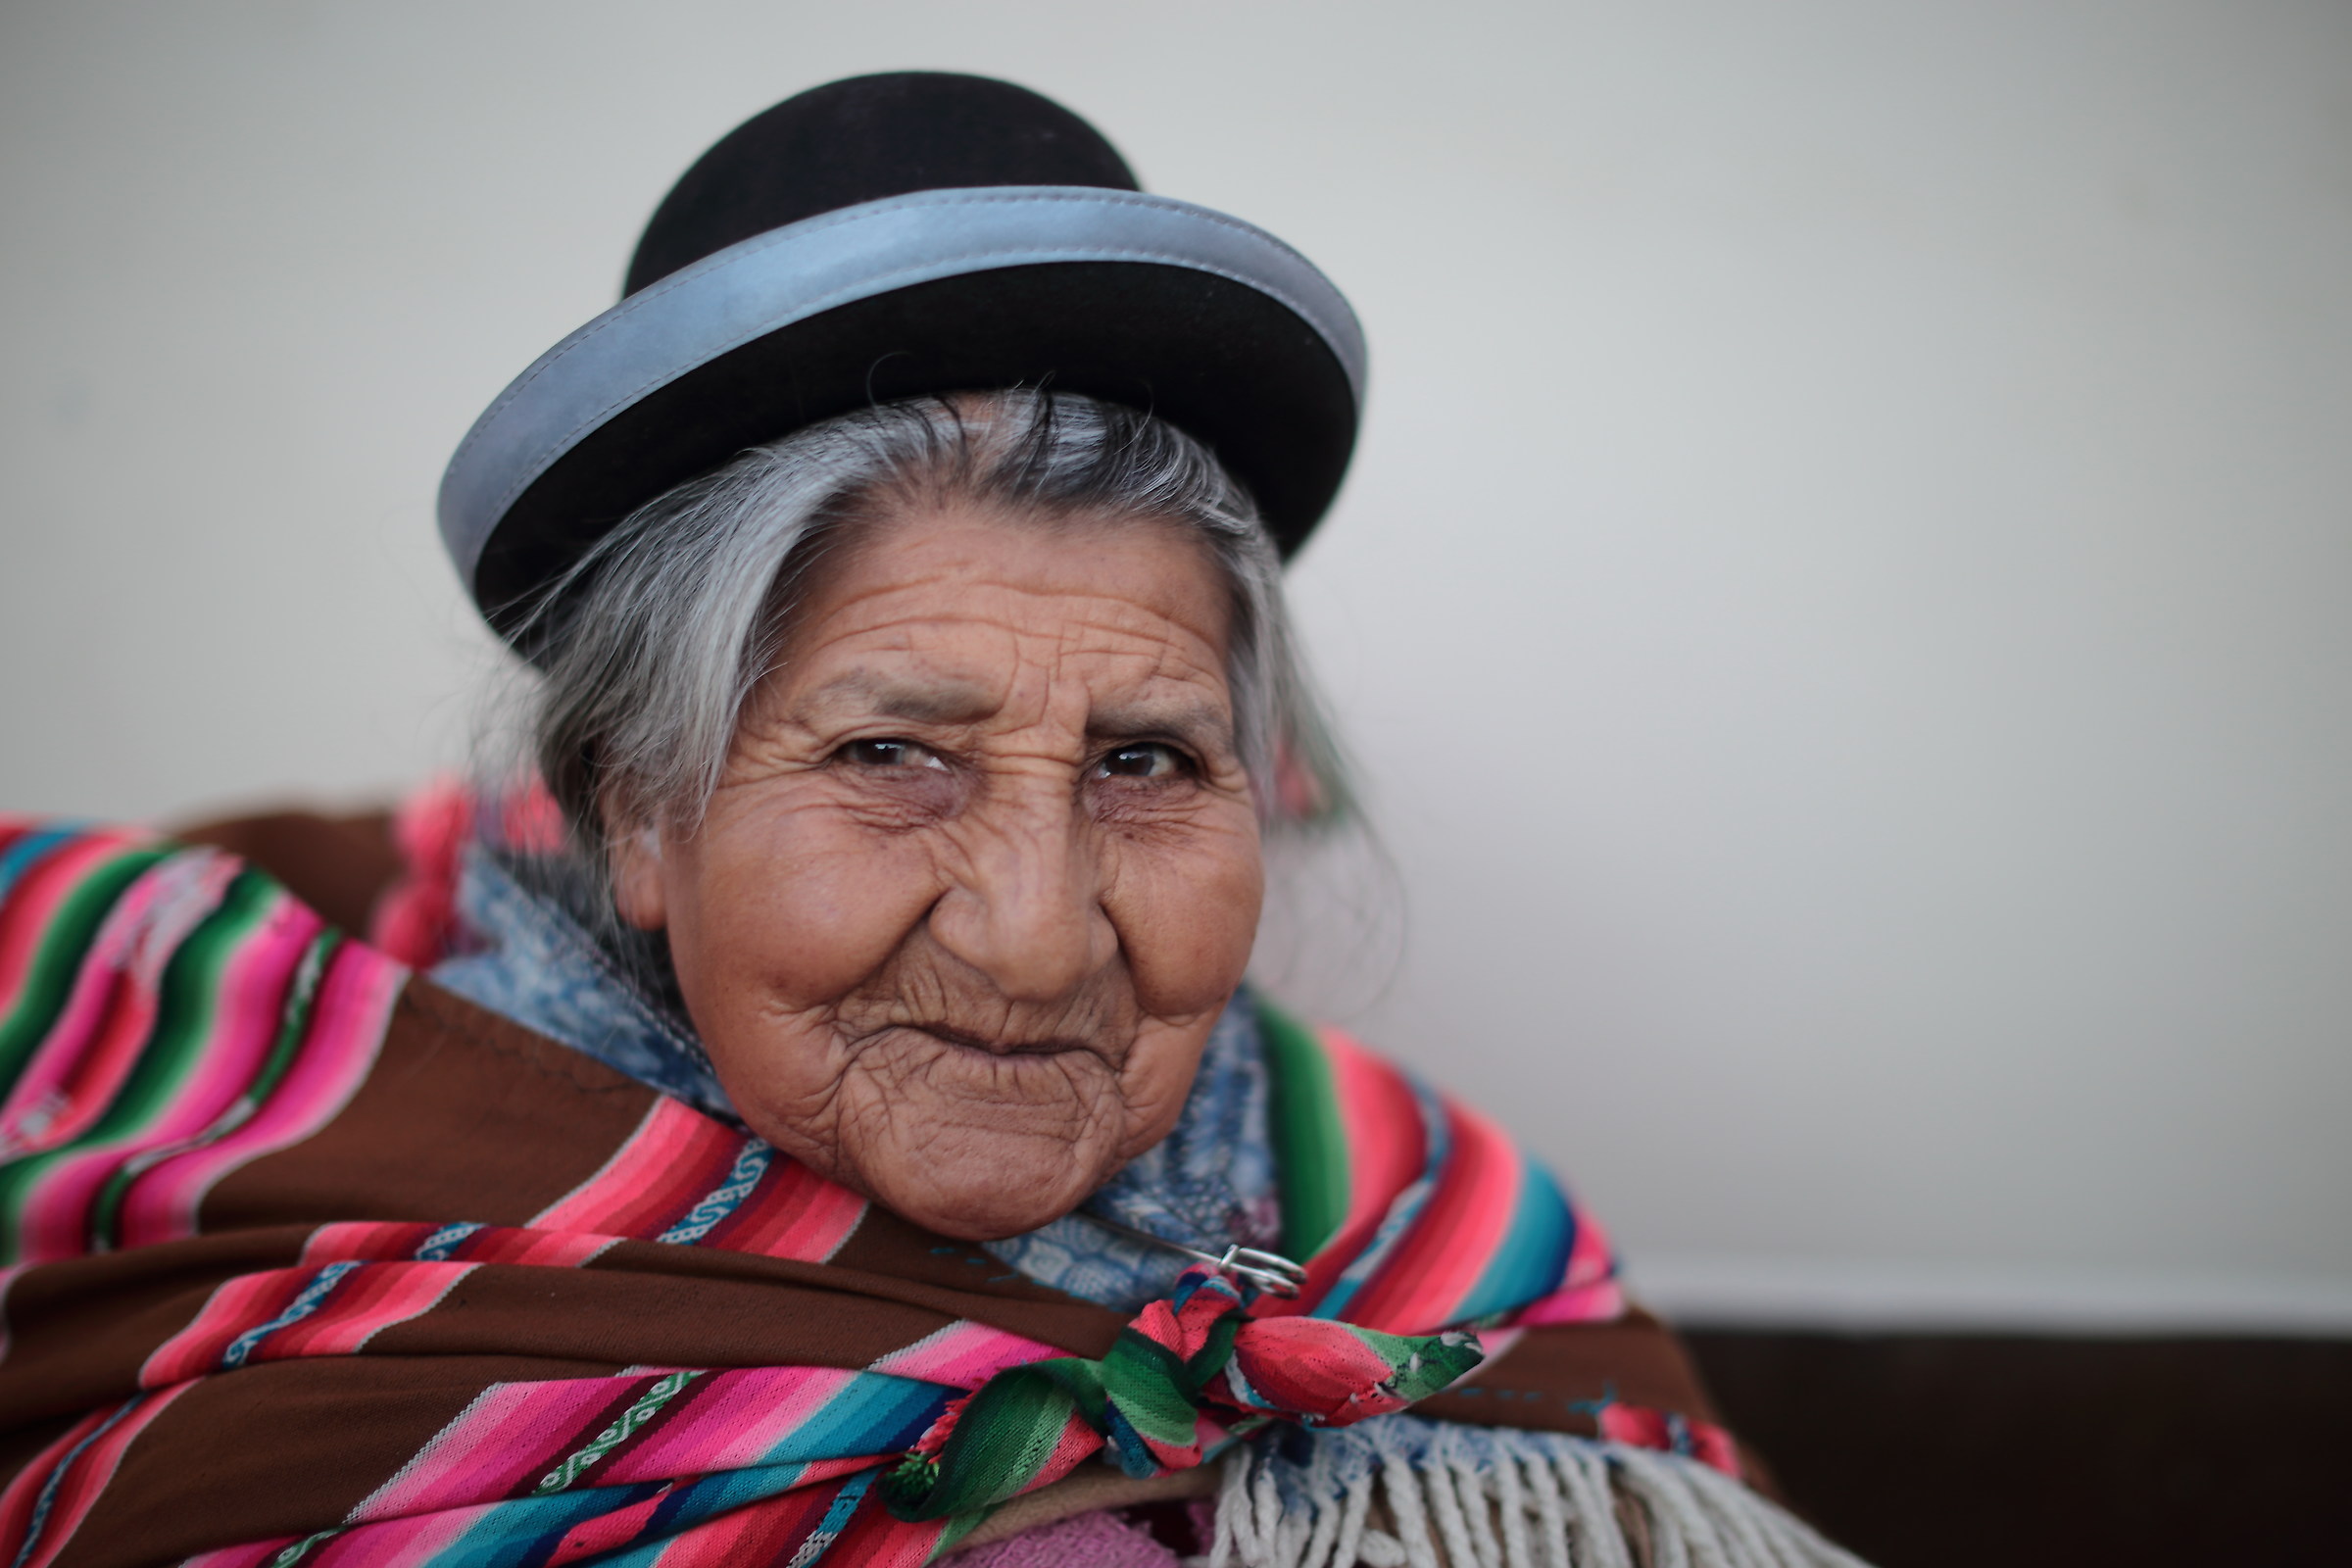 Time marks the faces of the Andes...